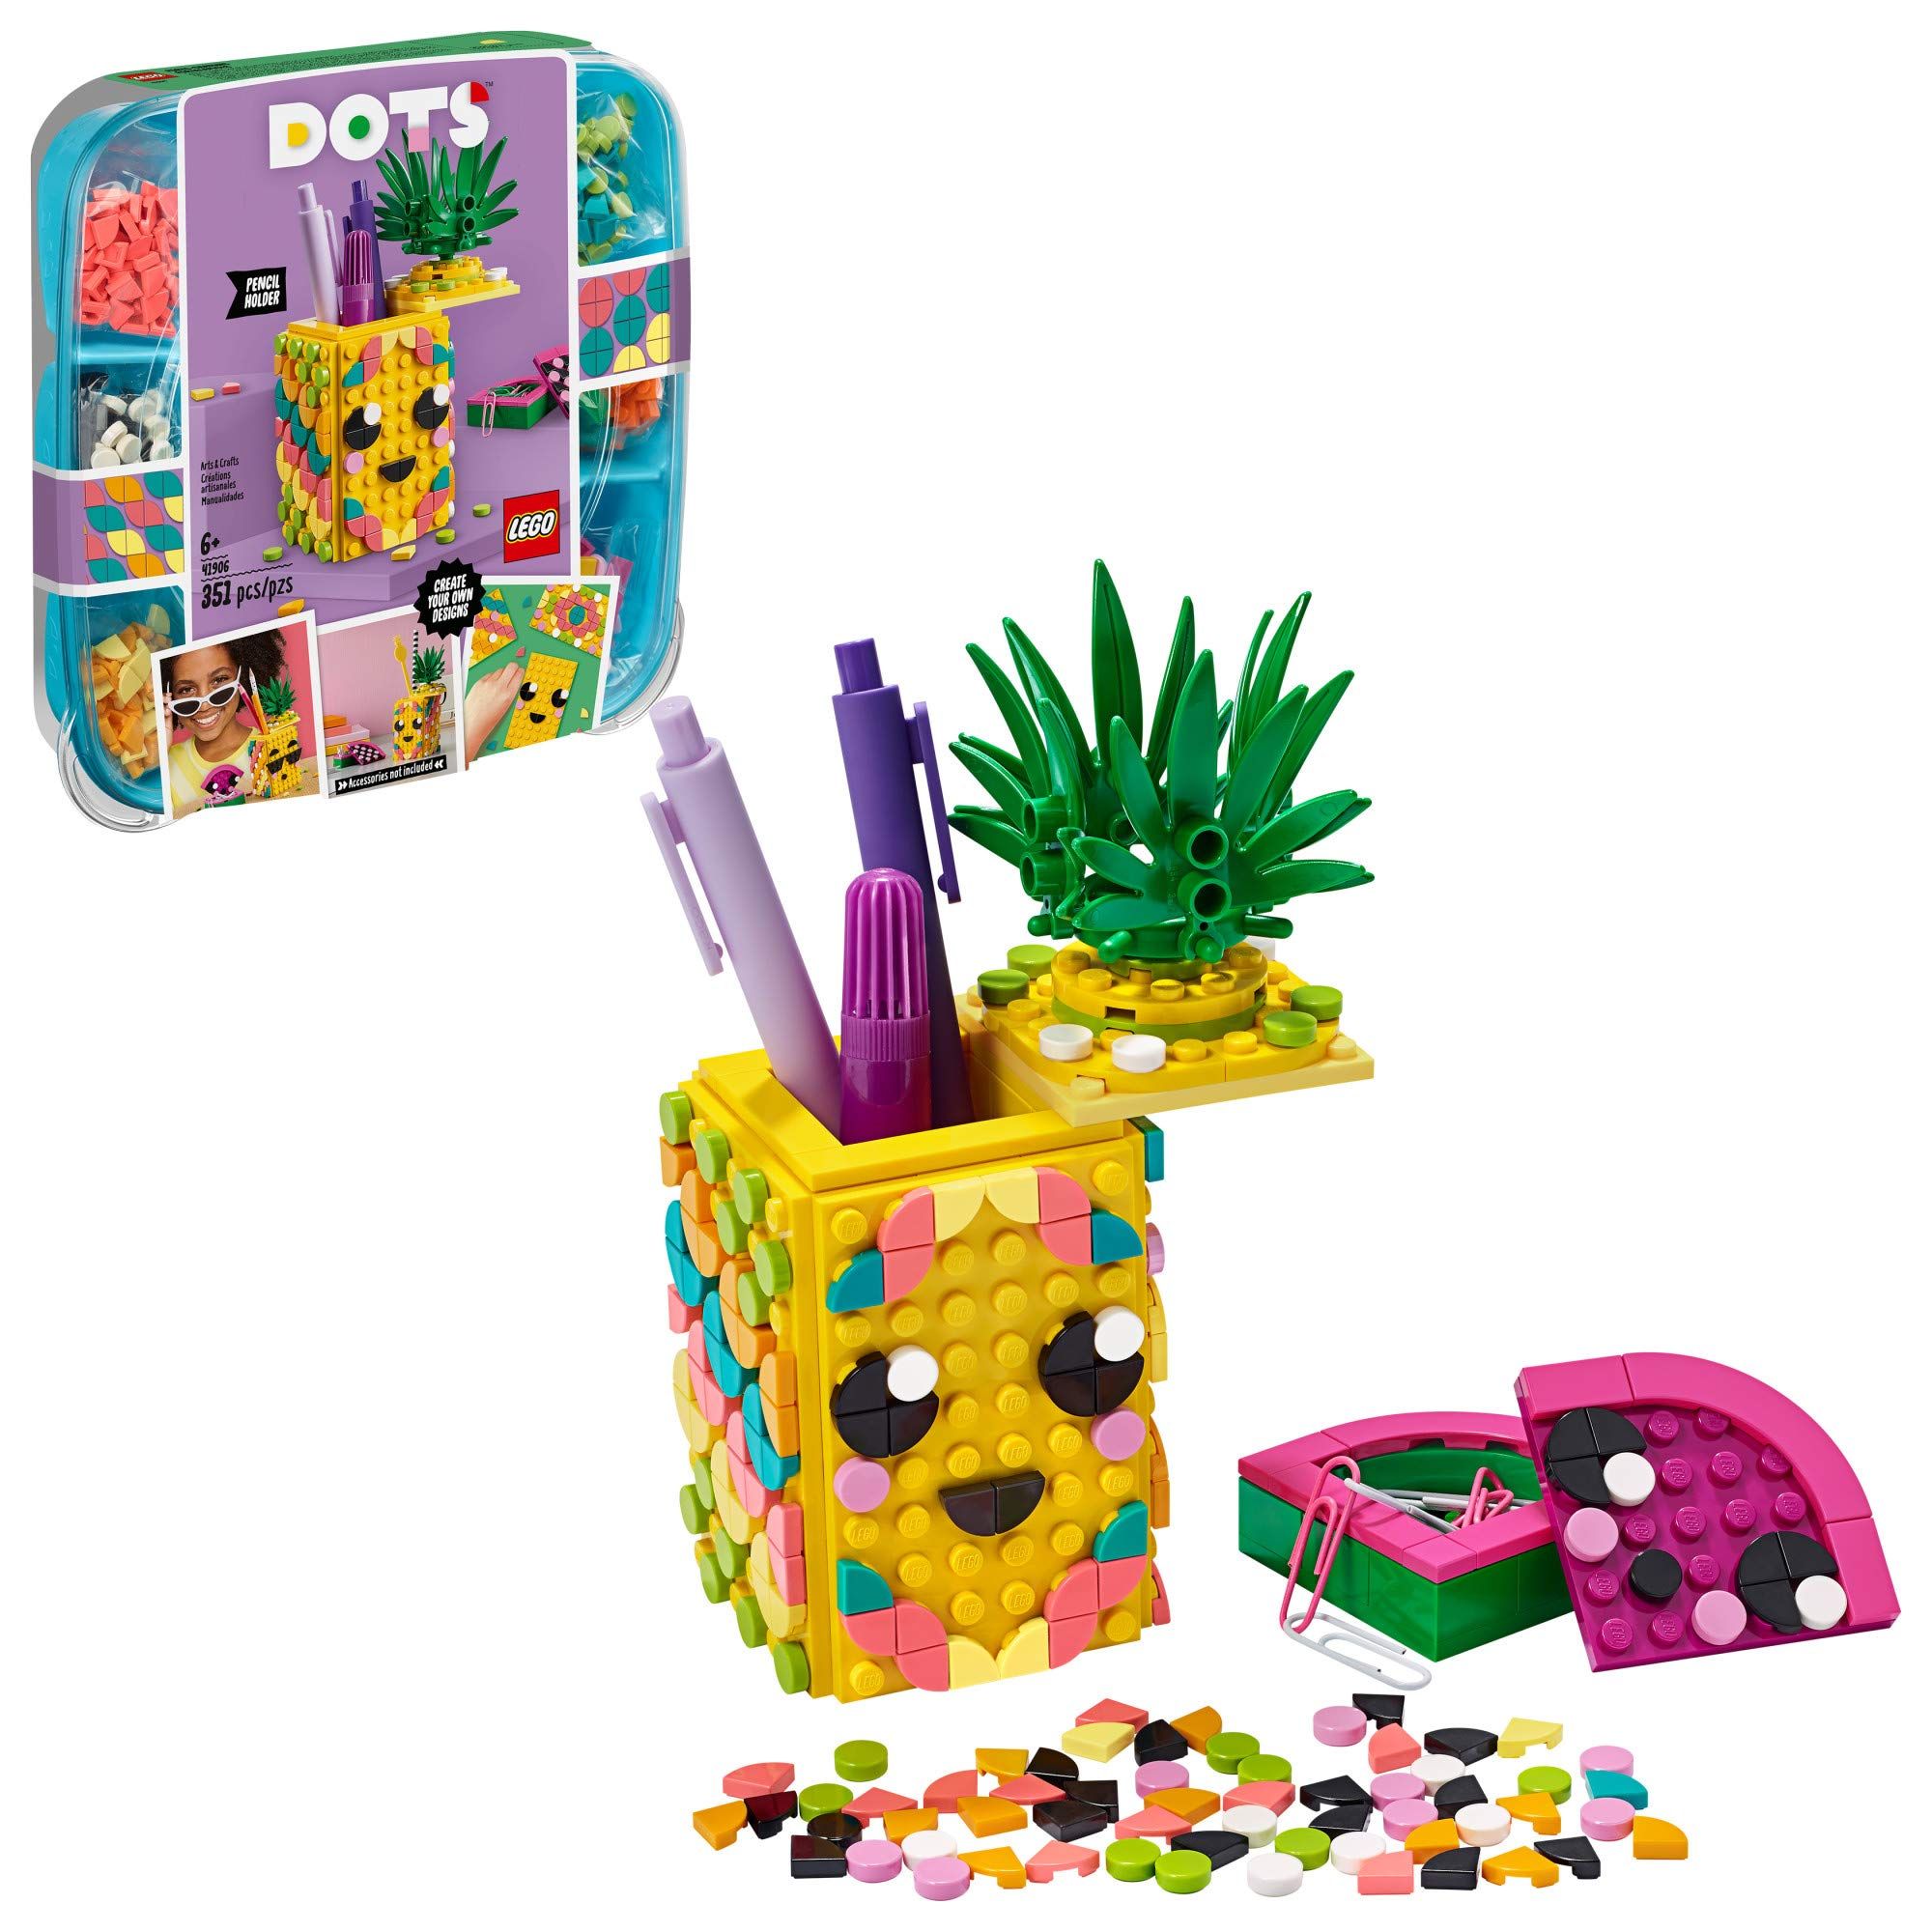 LEGO DOTS Pineapple Pencil Holder 41906 DIY Craft Decorations Kit, A Fun Craft kit for Kids who L... | Amazon (US)